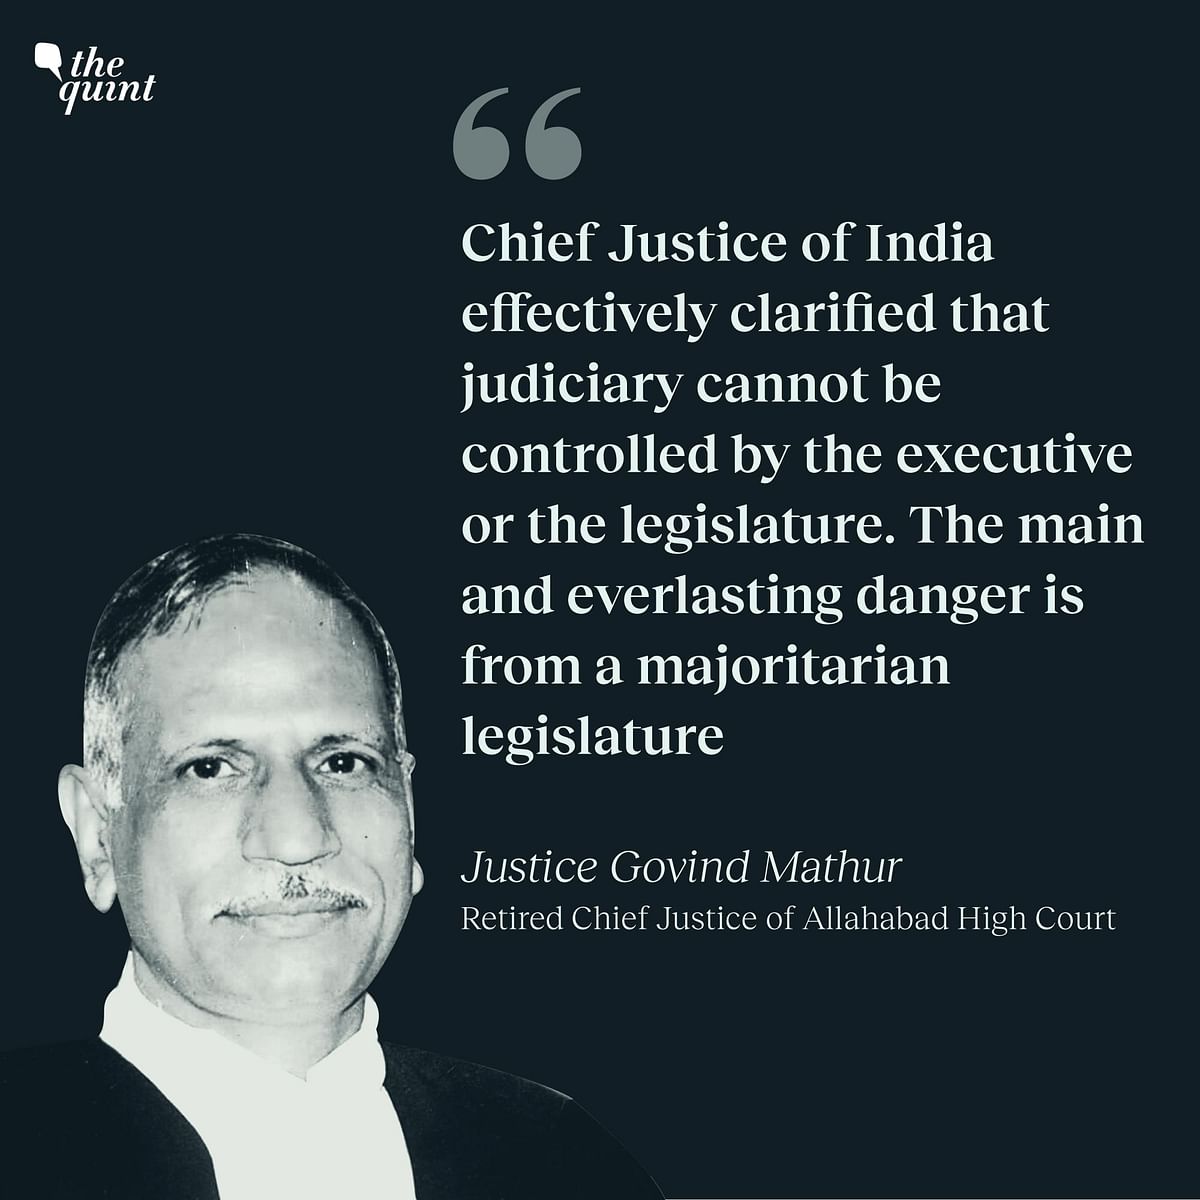 Judges, activists welcome CJI Ramana's speech on dissent & accountability, hope to see words turn into real action.